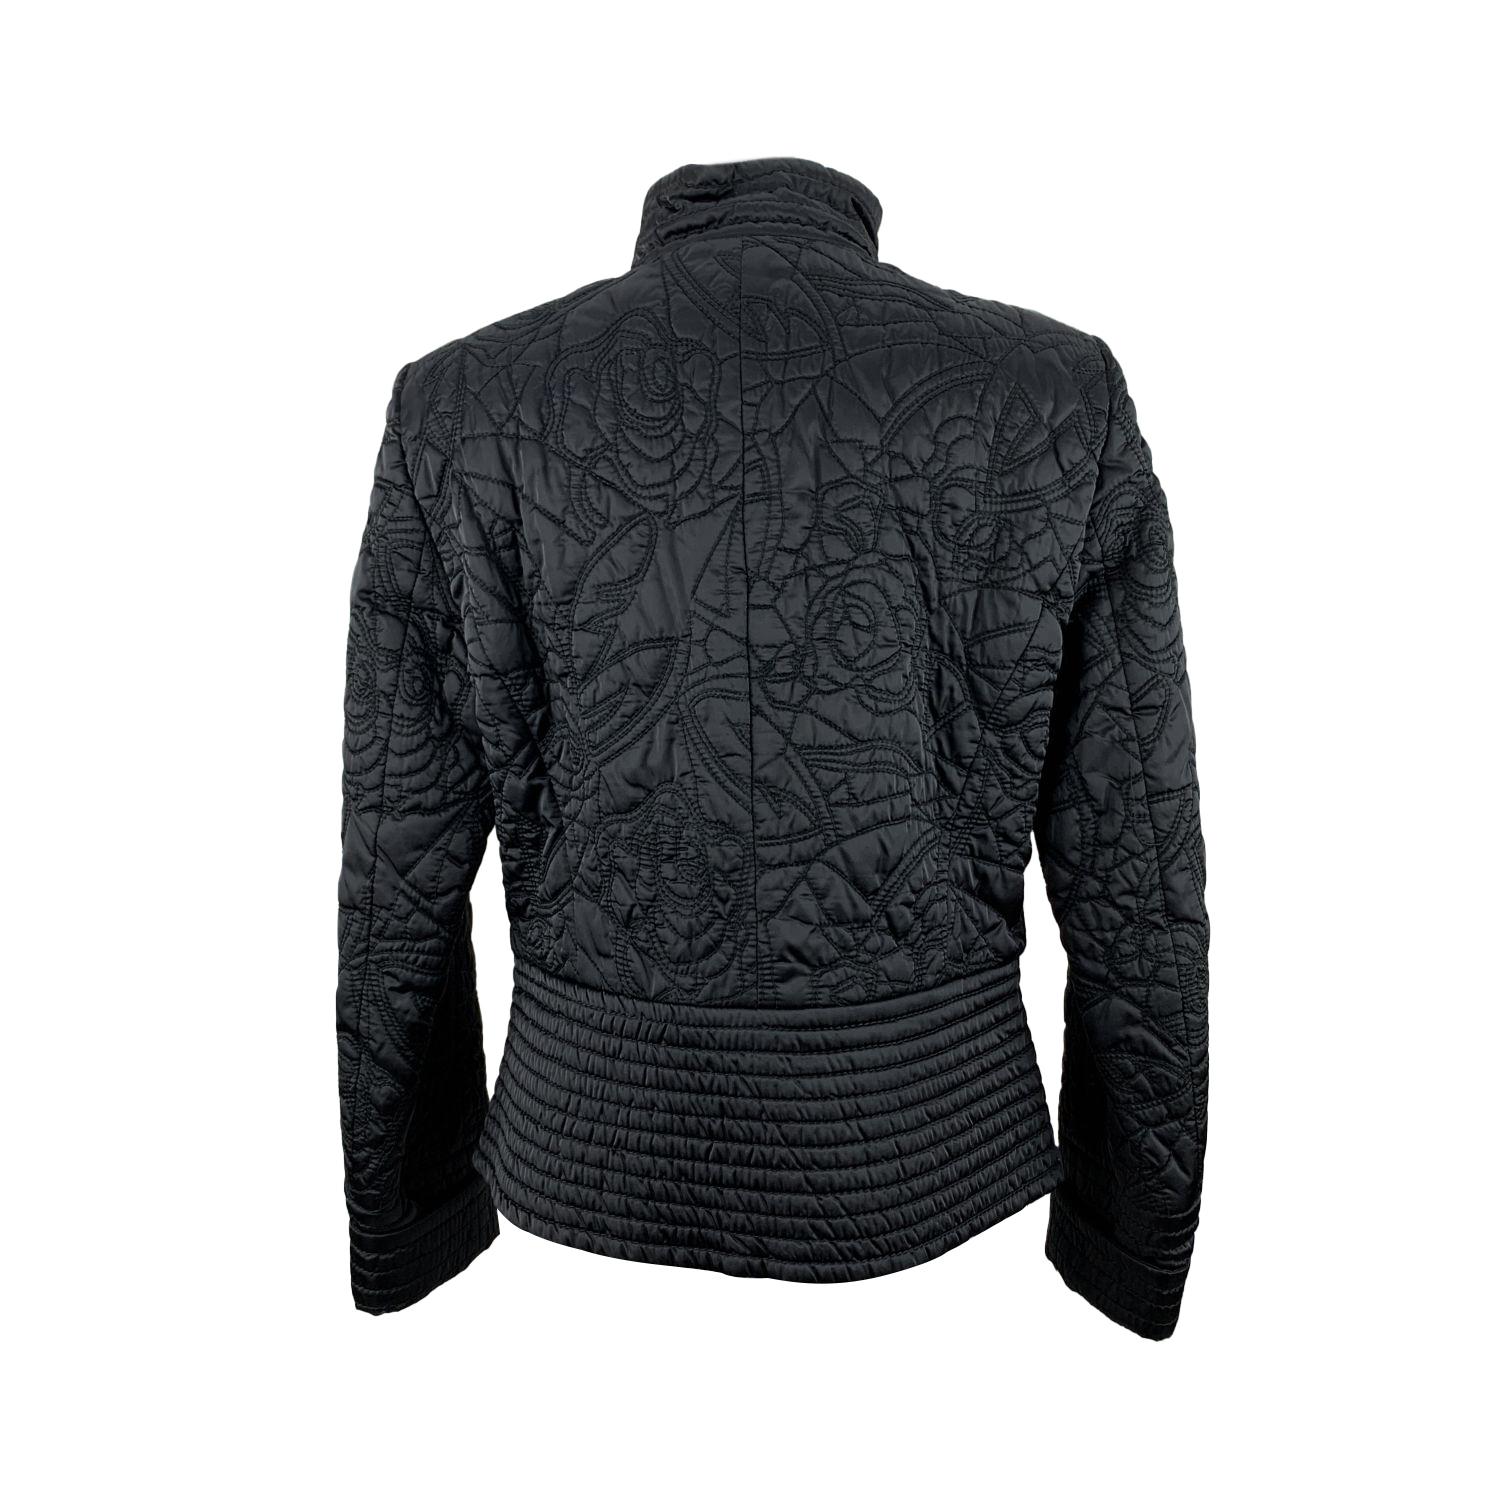 Lancetti black quilted jacket. Made in black nylon with an allover floral quilting. Light padding. Asymmetric button closure on the front. Composition: 100% Nylon. Size: 44 IT (it should correspond to a MEDIUM size)

Details

MATERIAL: Nylon

COLOR: